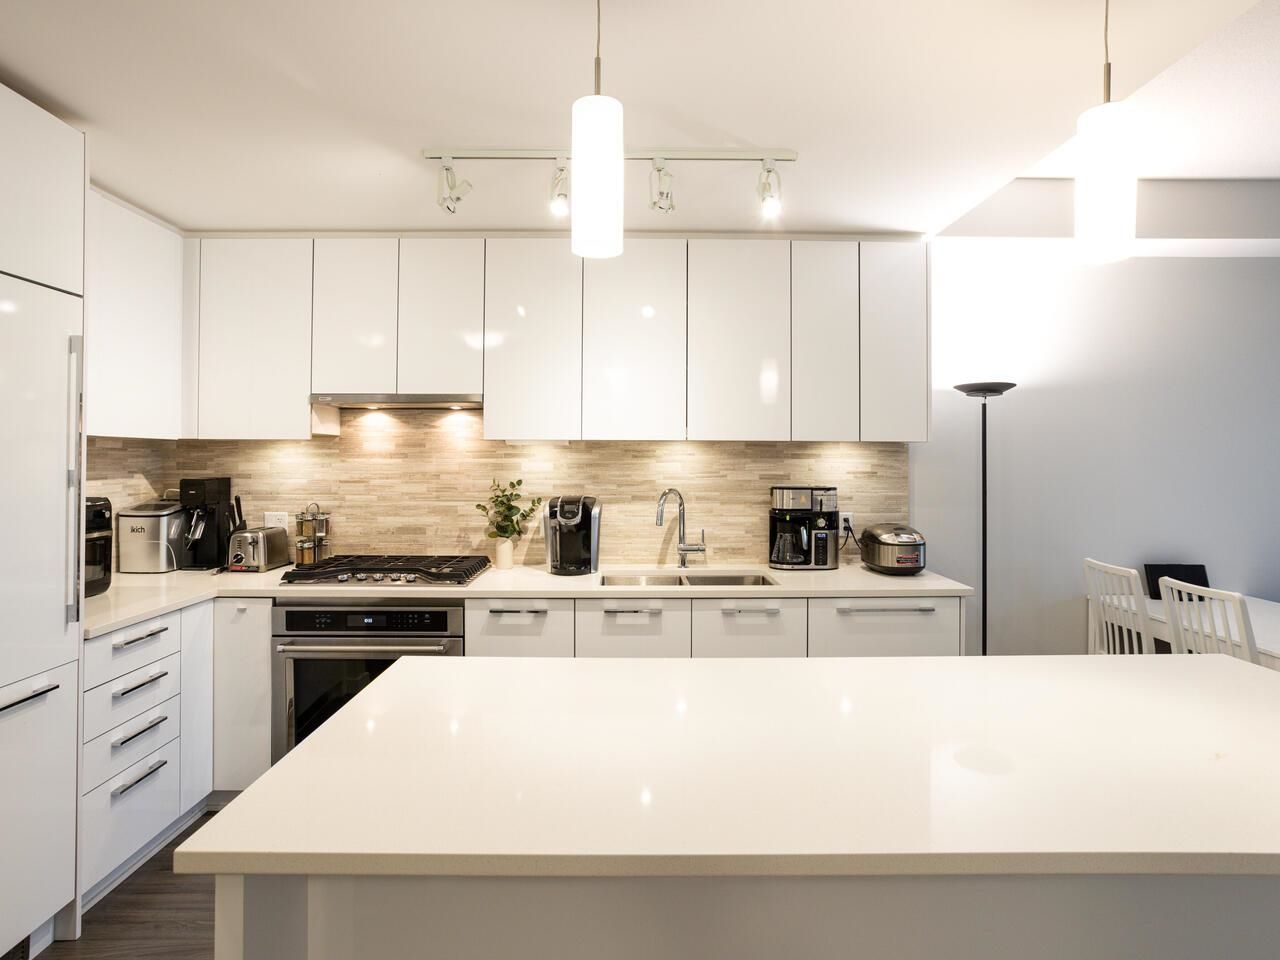 New property listed in West Cambie, Richmond